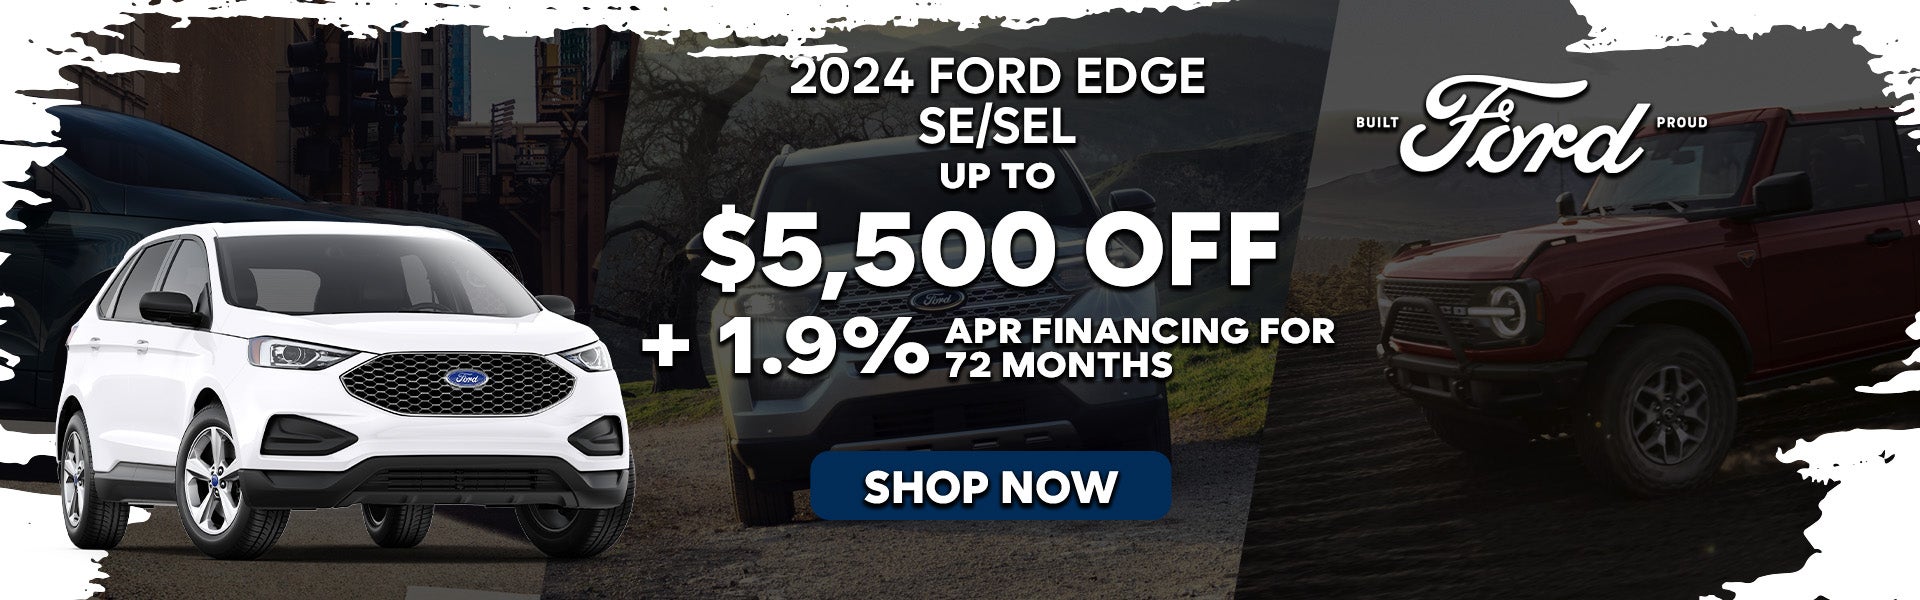 2024 Ford Edge SE/SEL Special Offer